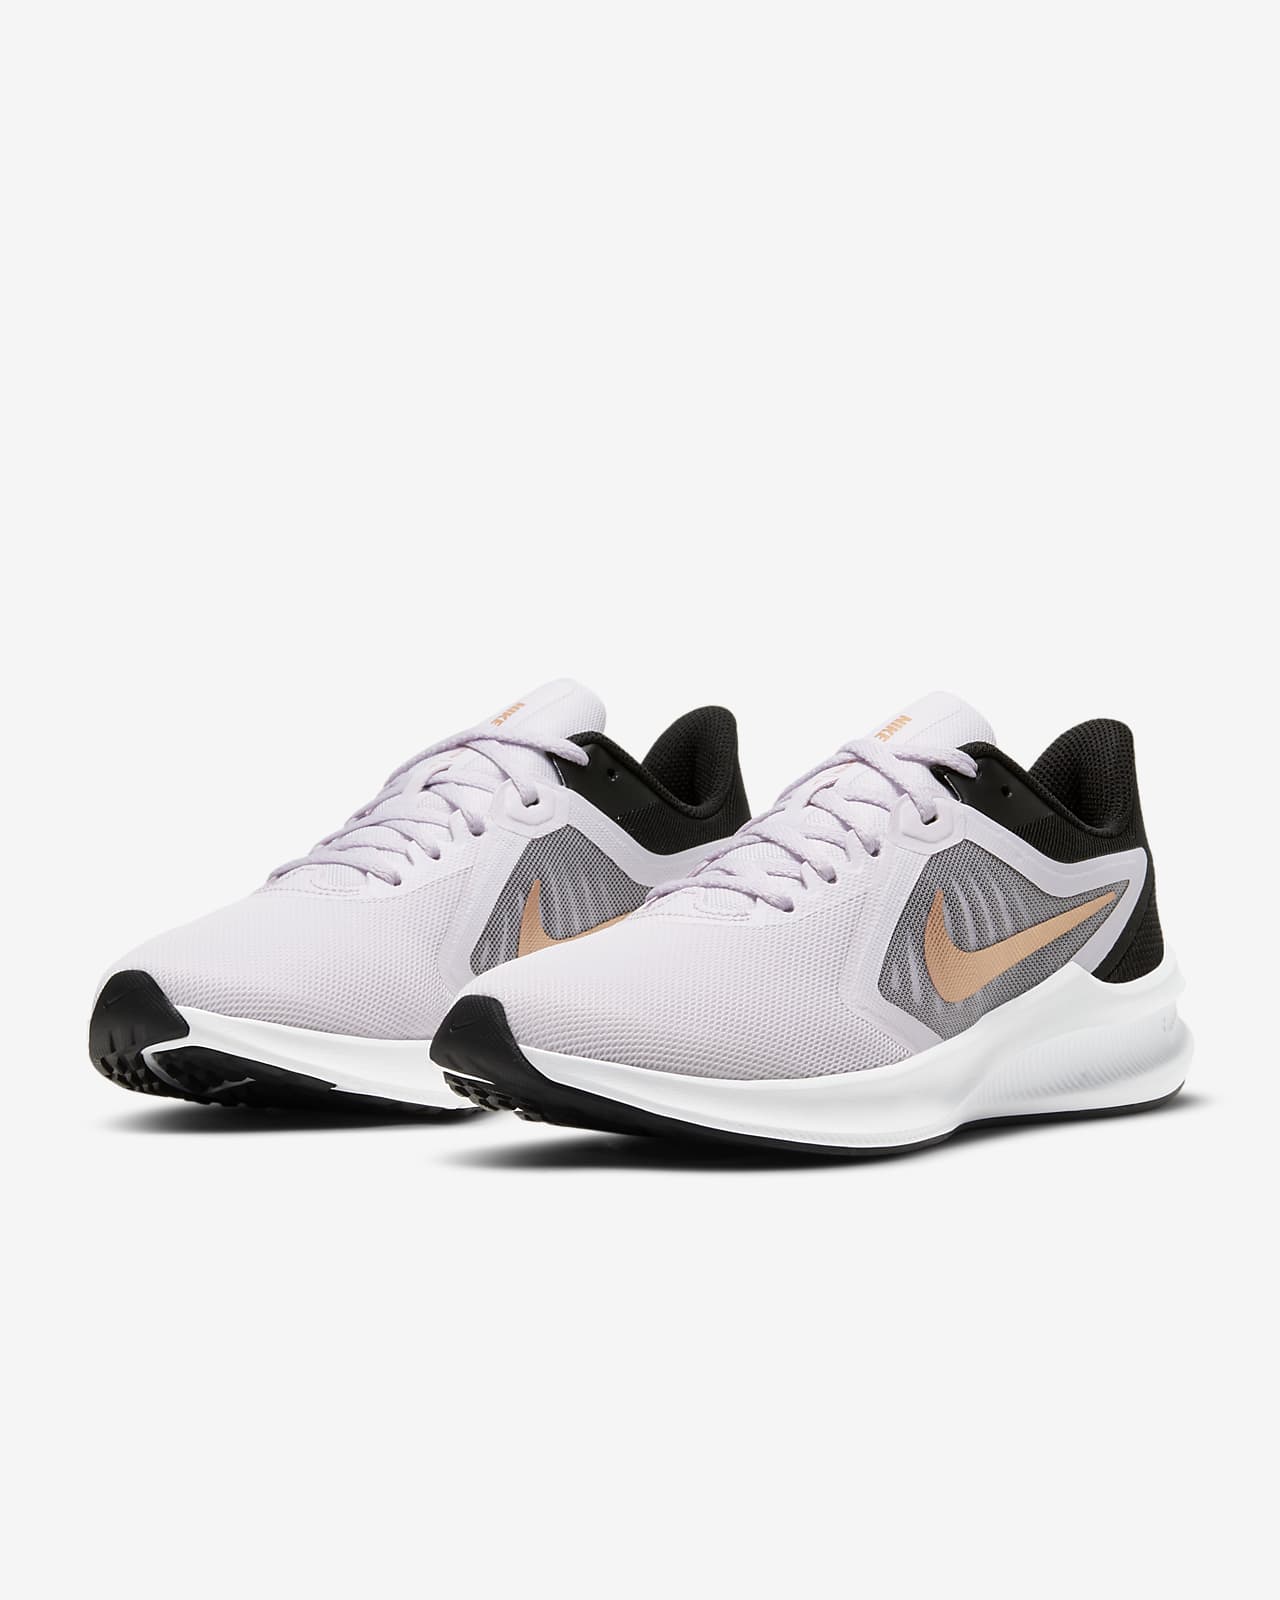 nike downshifter 10 price